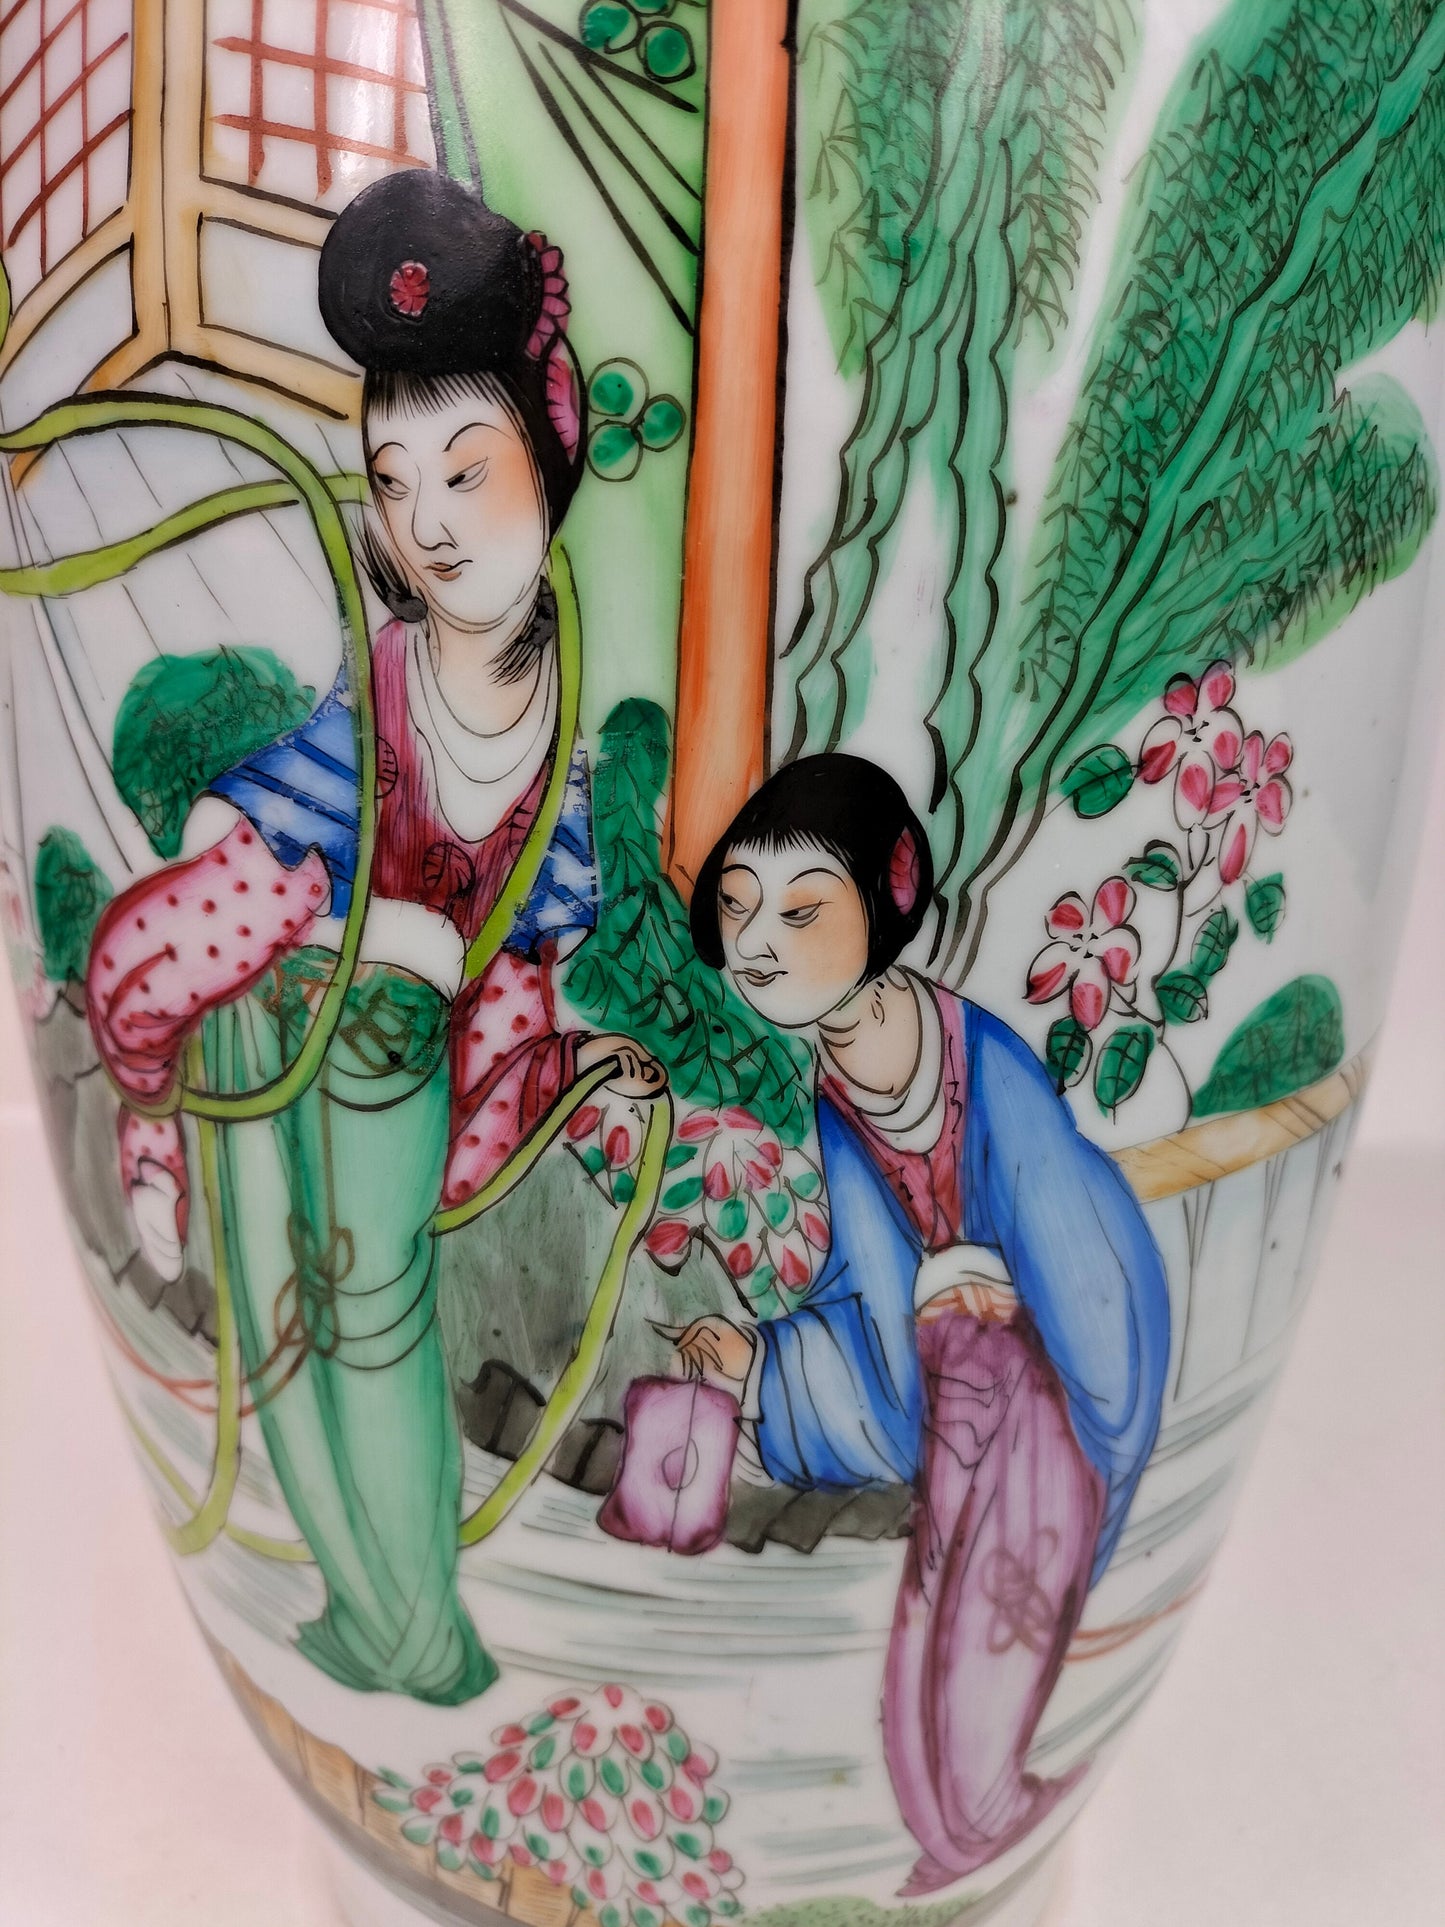 Large antique Chinese vase with a garden scene // Republic Period (1912-1949) #6